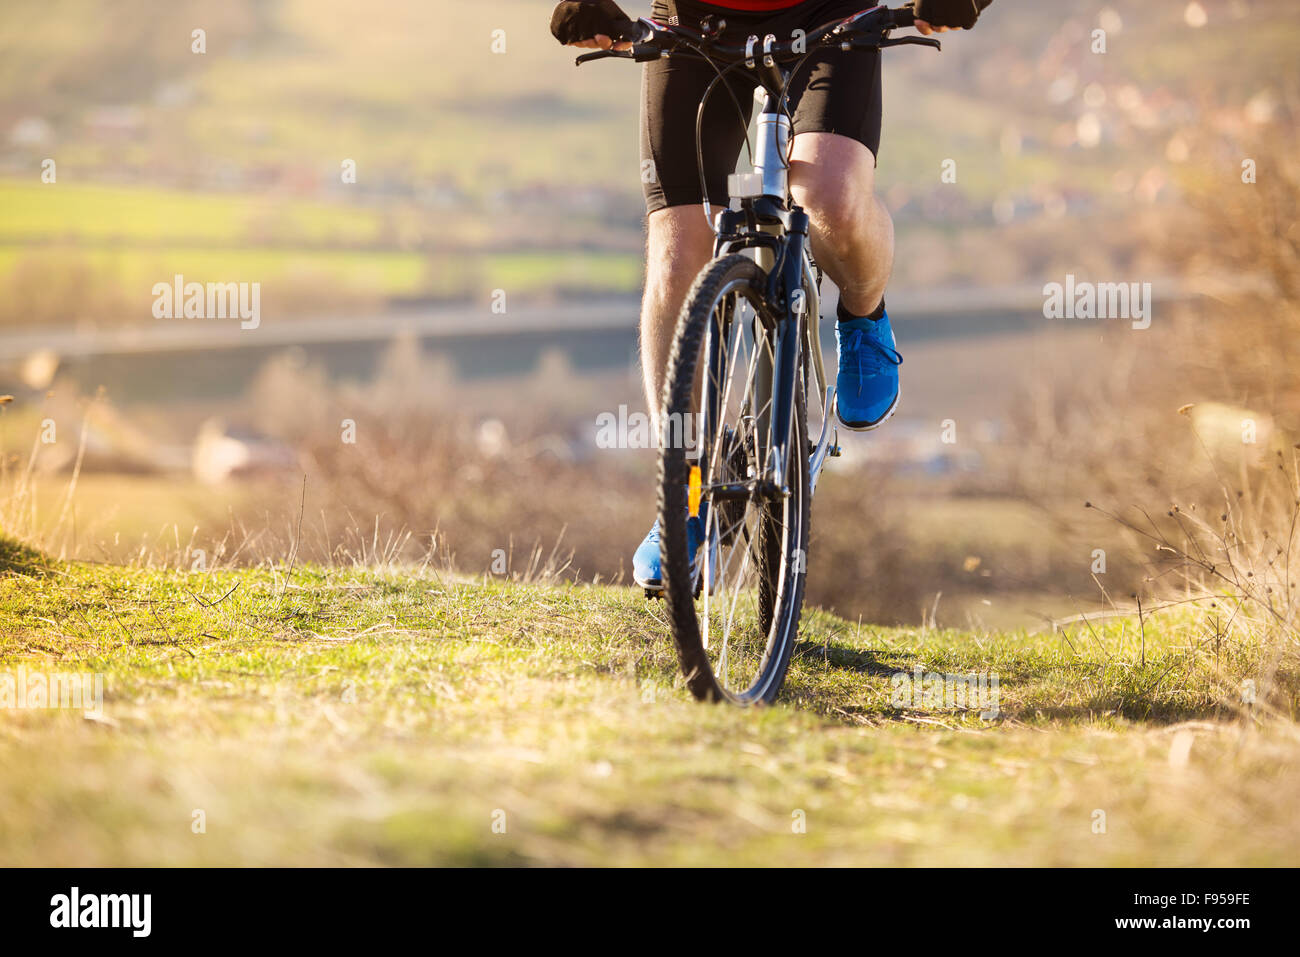 Detial of cyclist man legs riding mountain bike on outdoor trail in nature Stock Photo